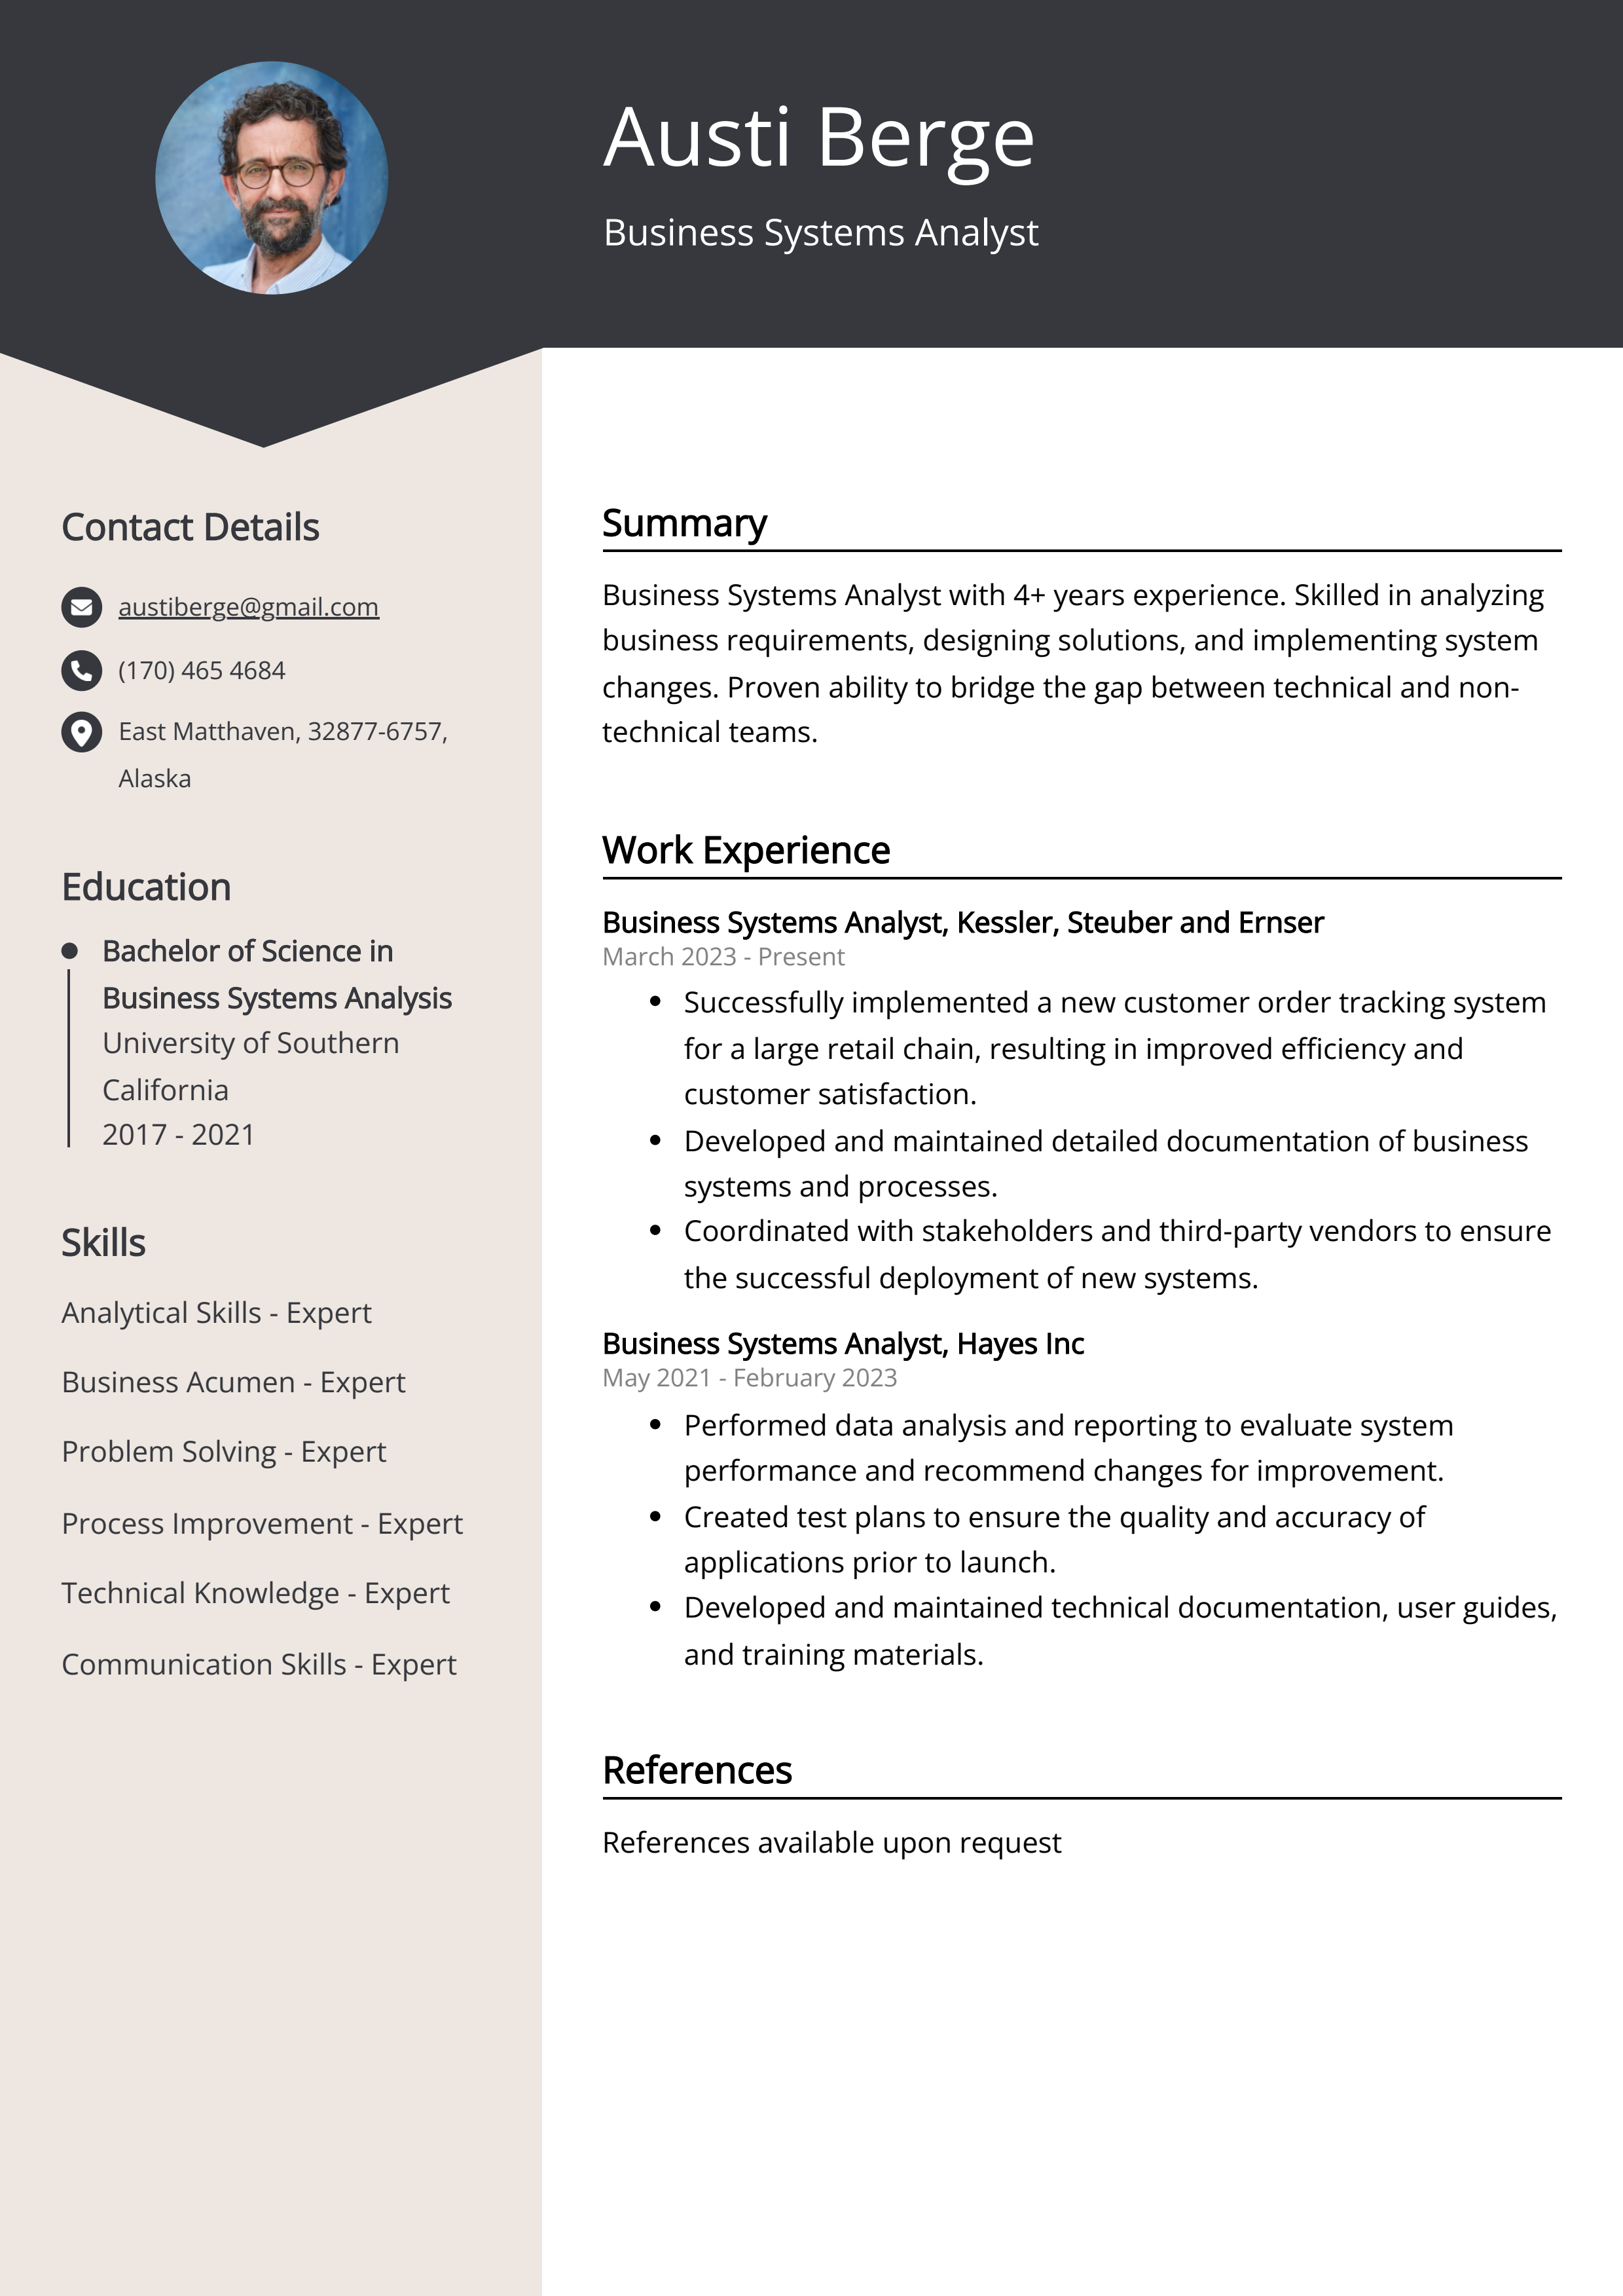 Business Systems Analyst CV Example